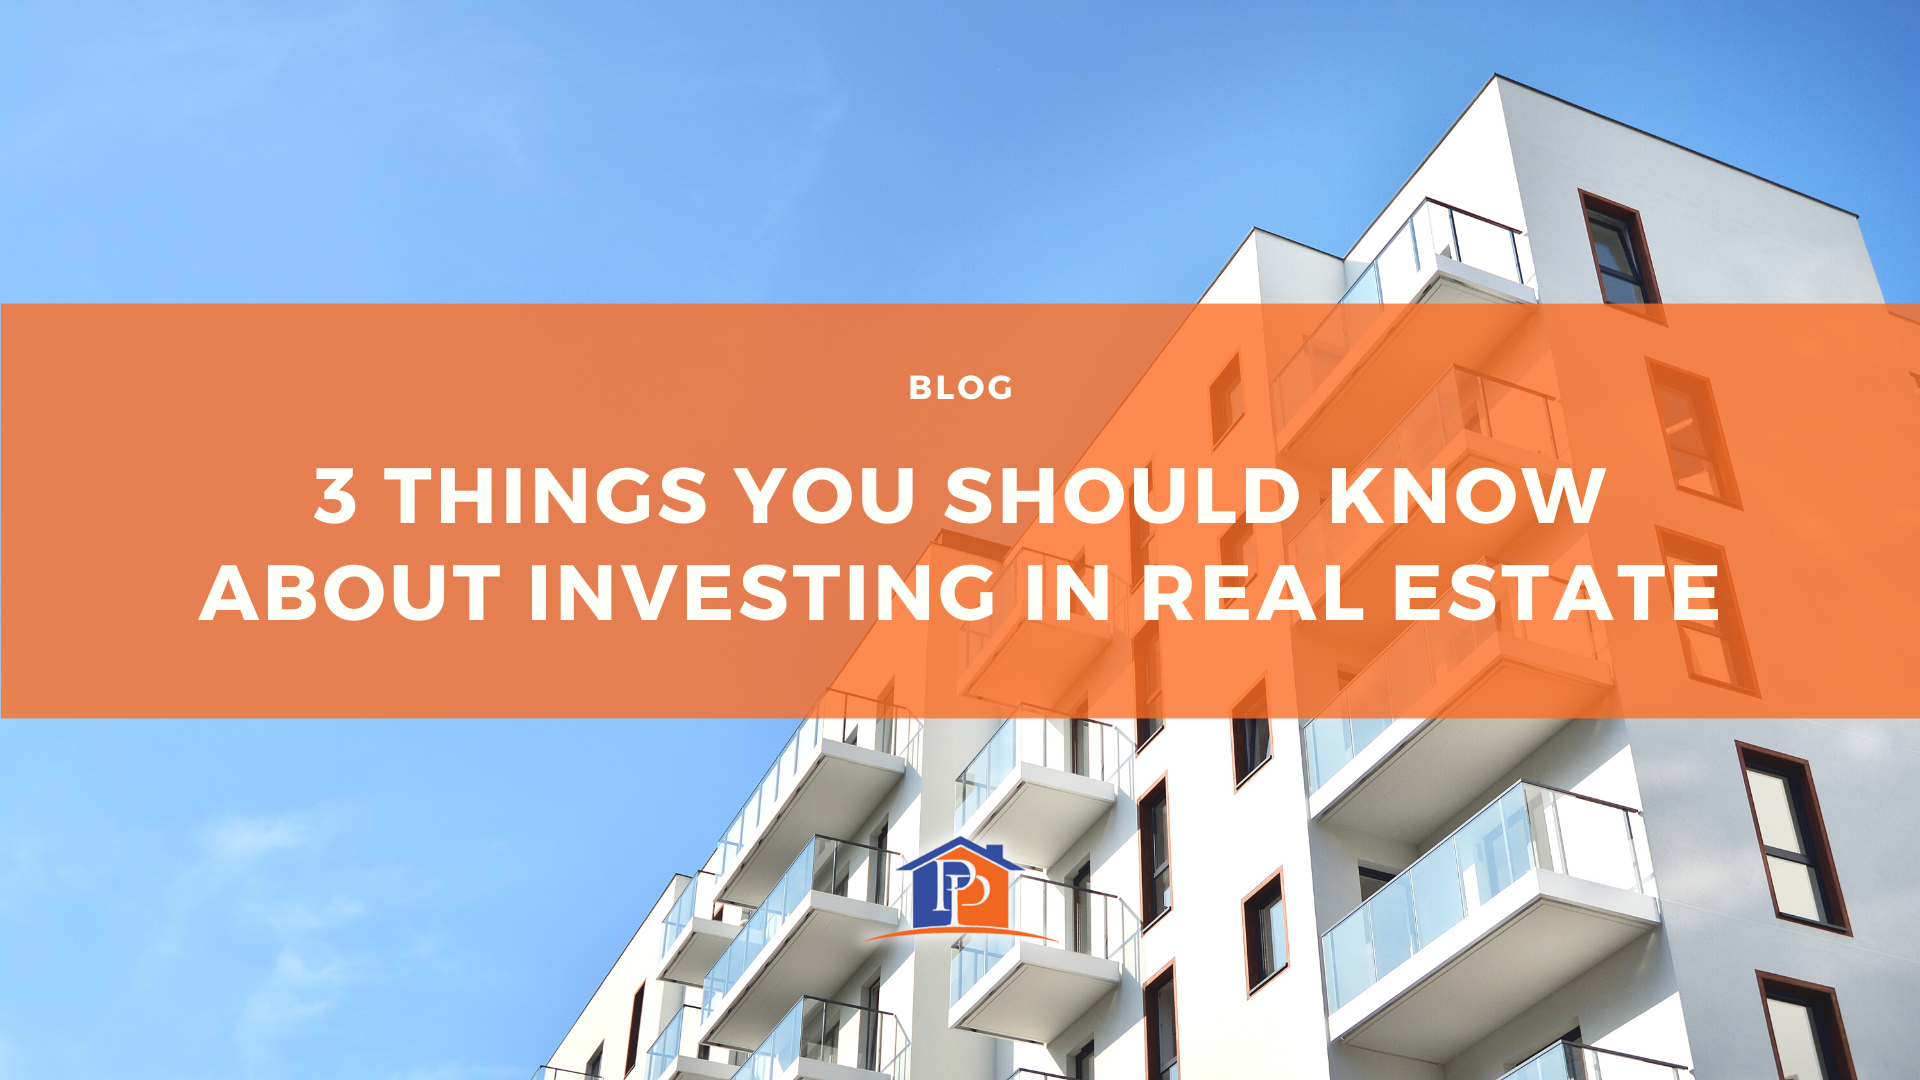 3 Things You Should Know About Investing in Real Estate